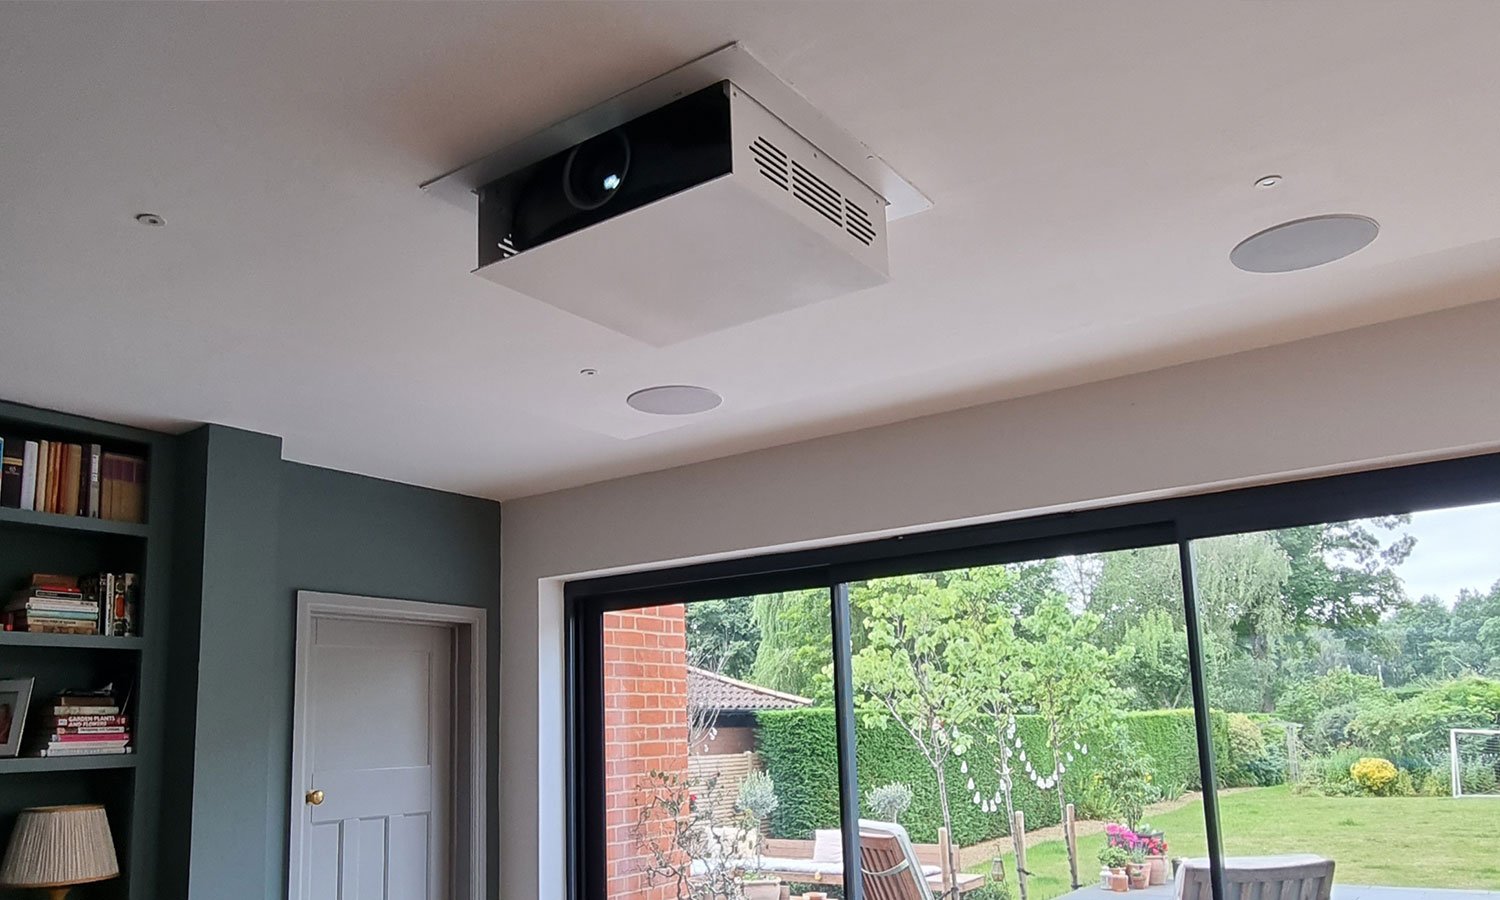 Projector in ceiling 